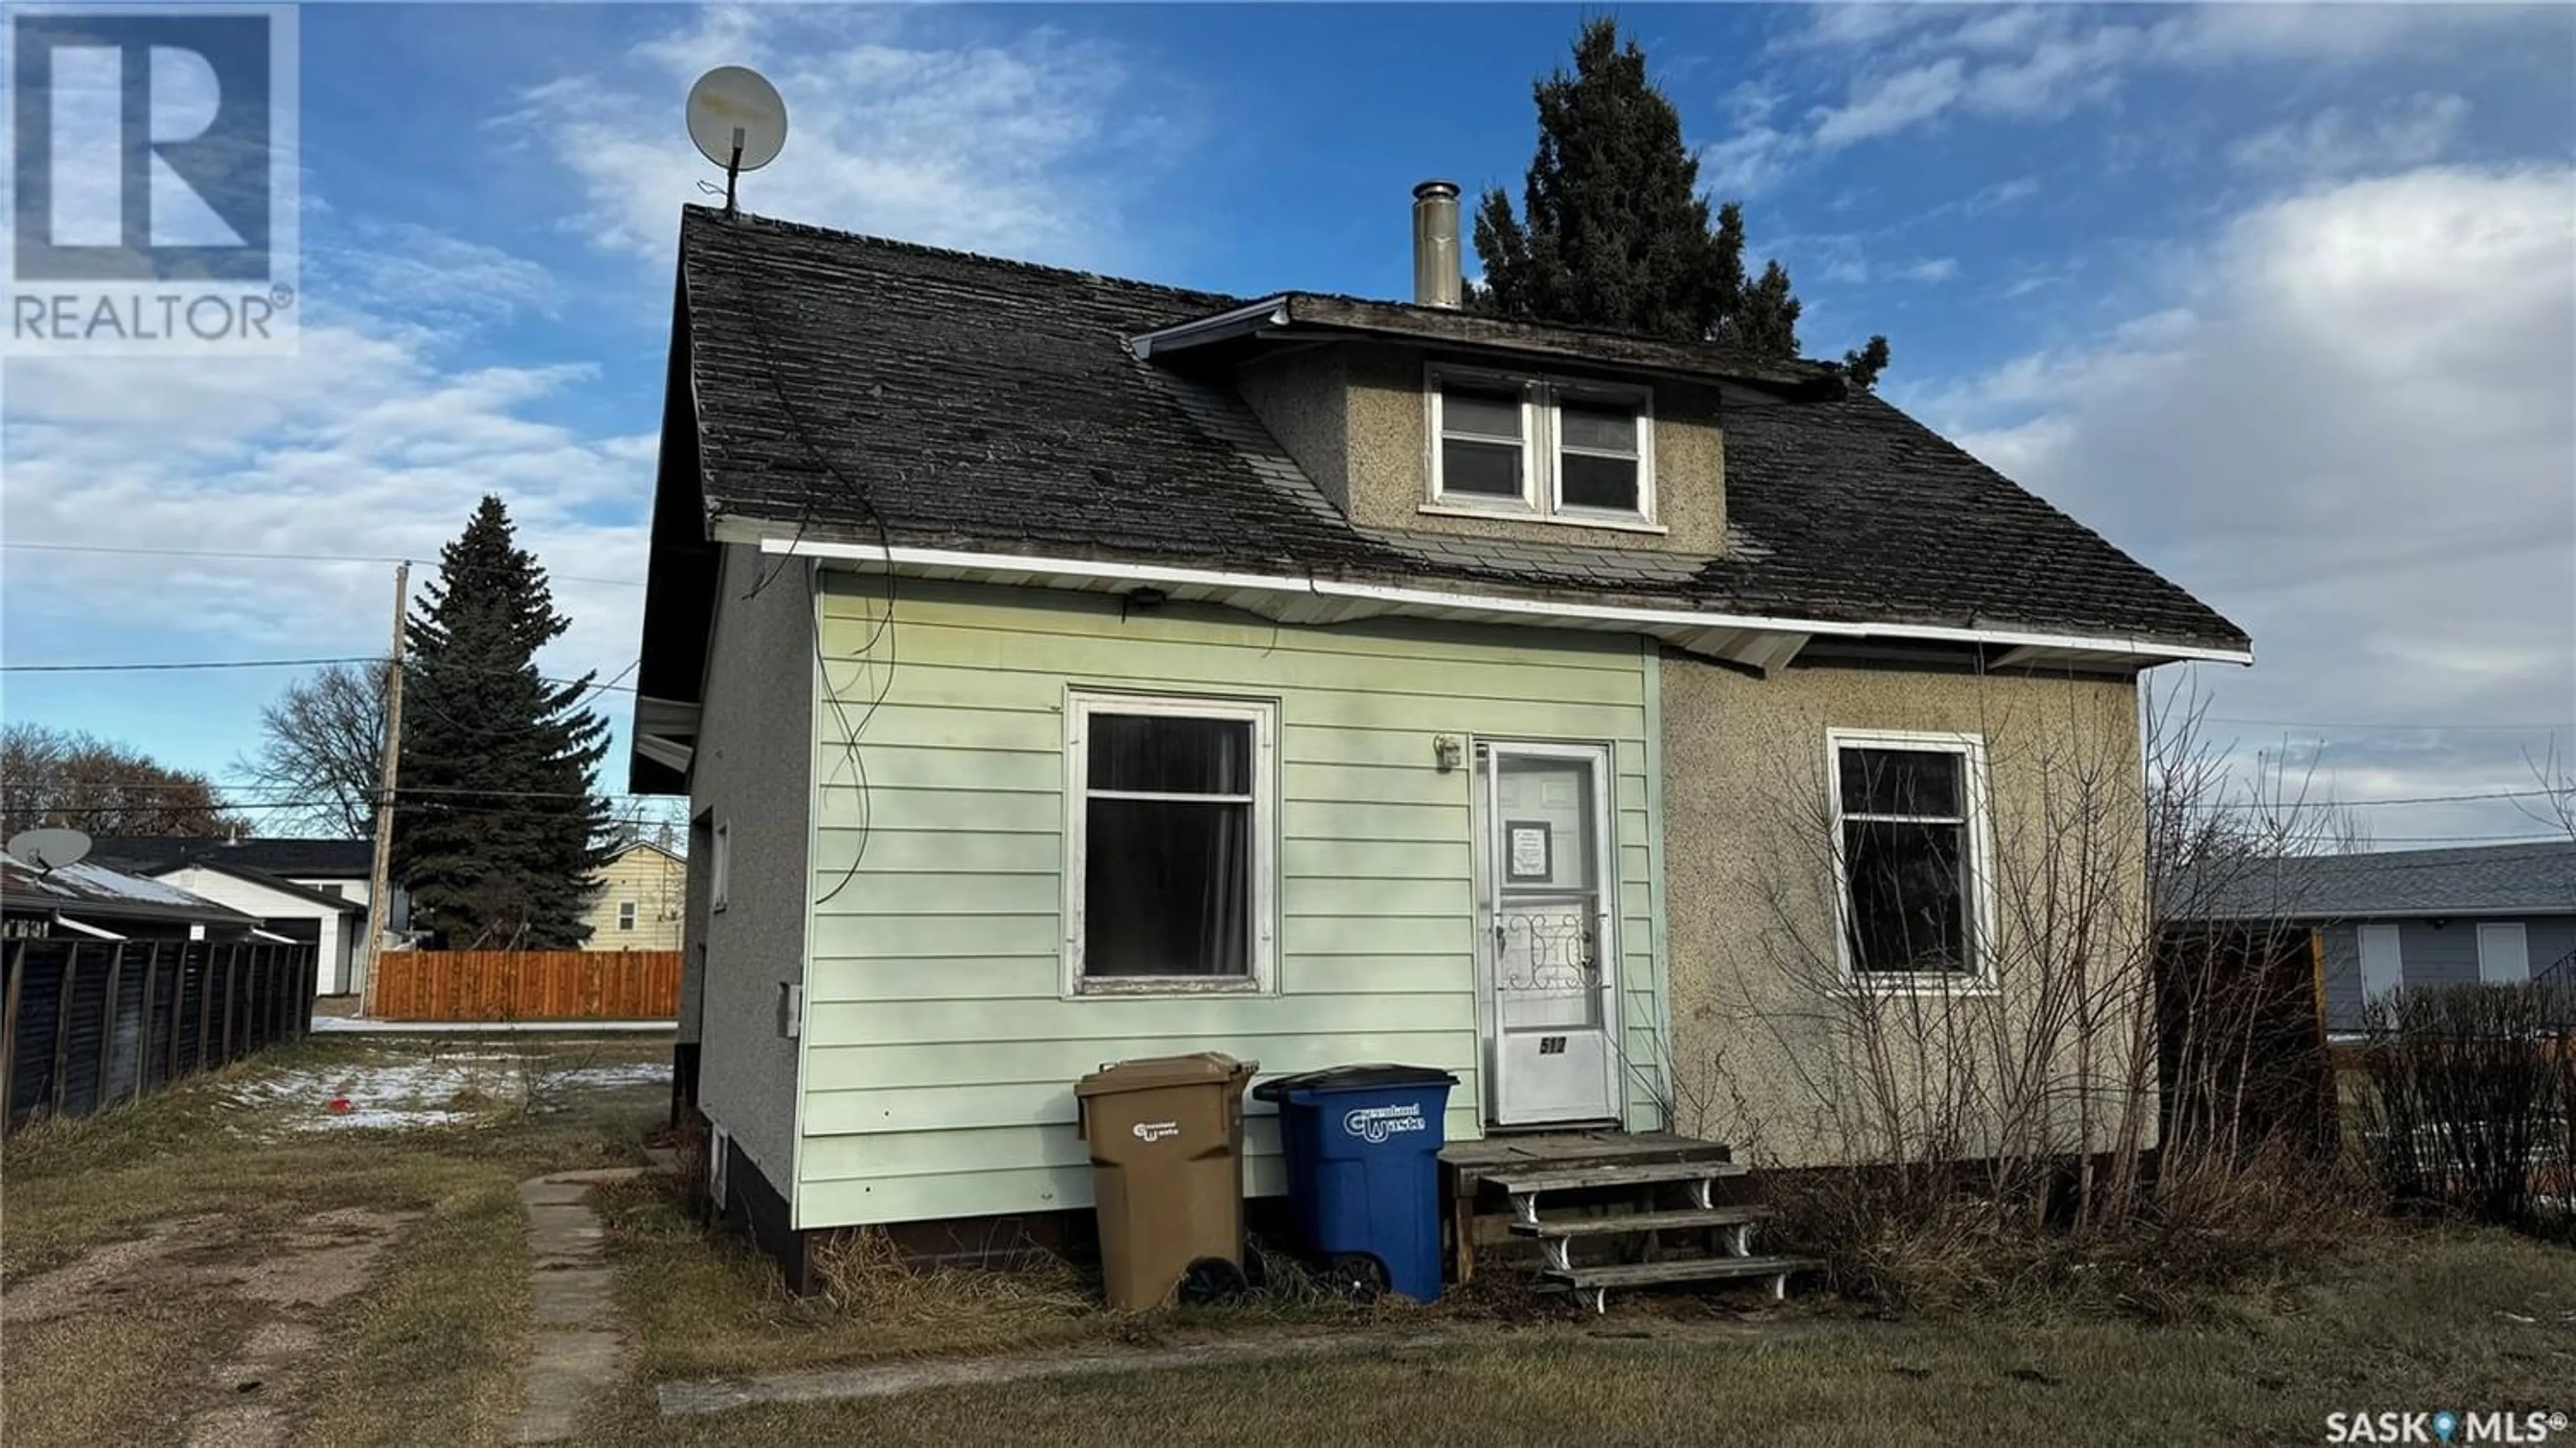 Home with unknown exterior material for 512 1st AVENUE E, Shellbrook Saskatchewan S0J2E0